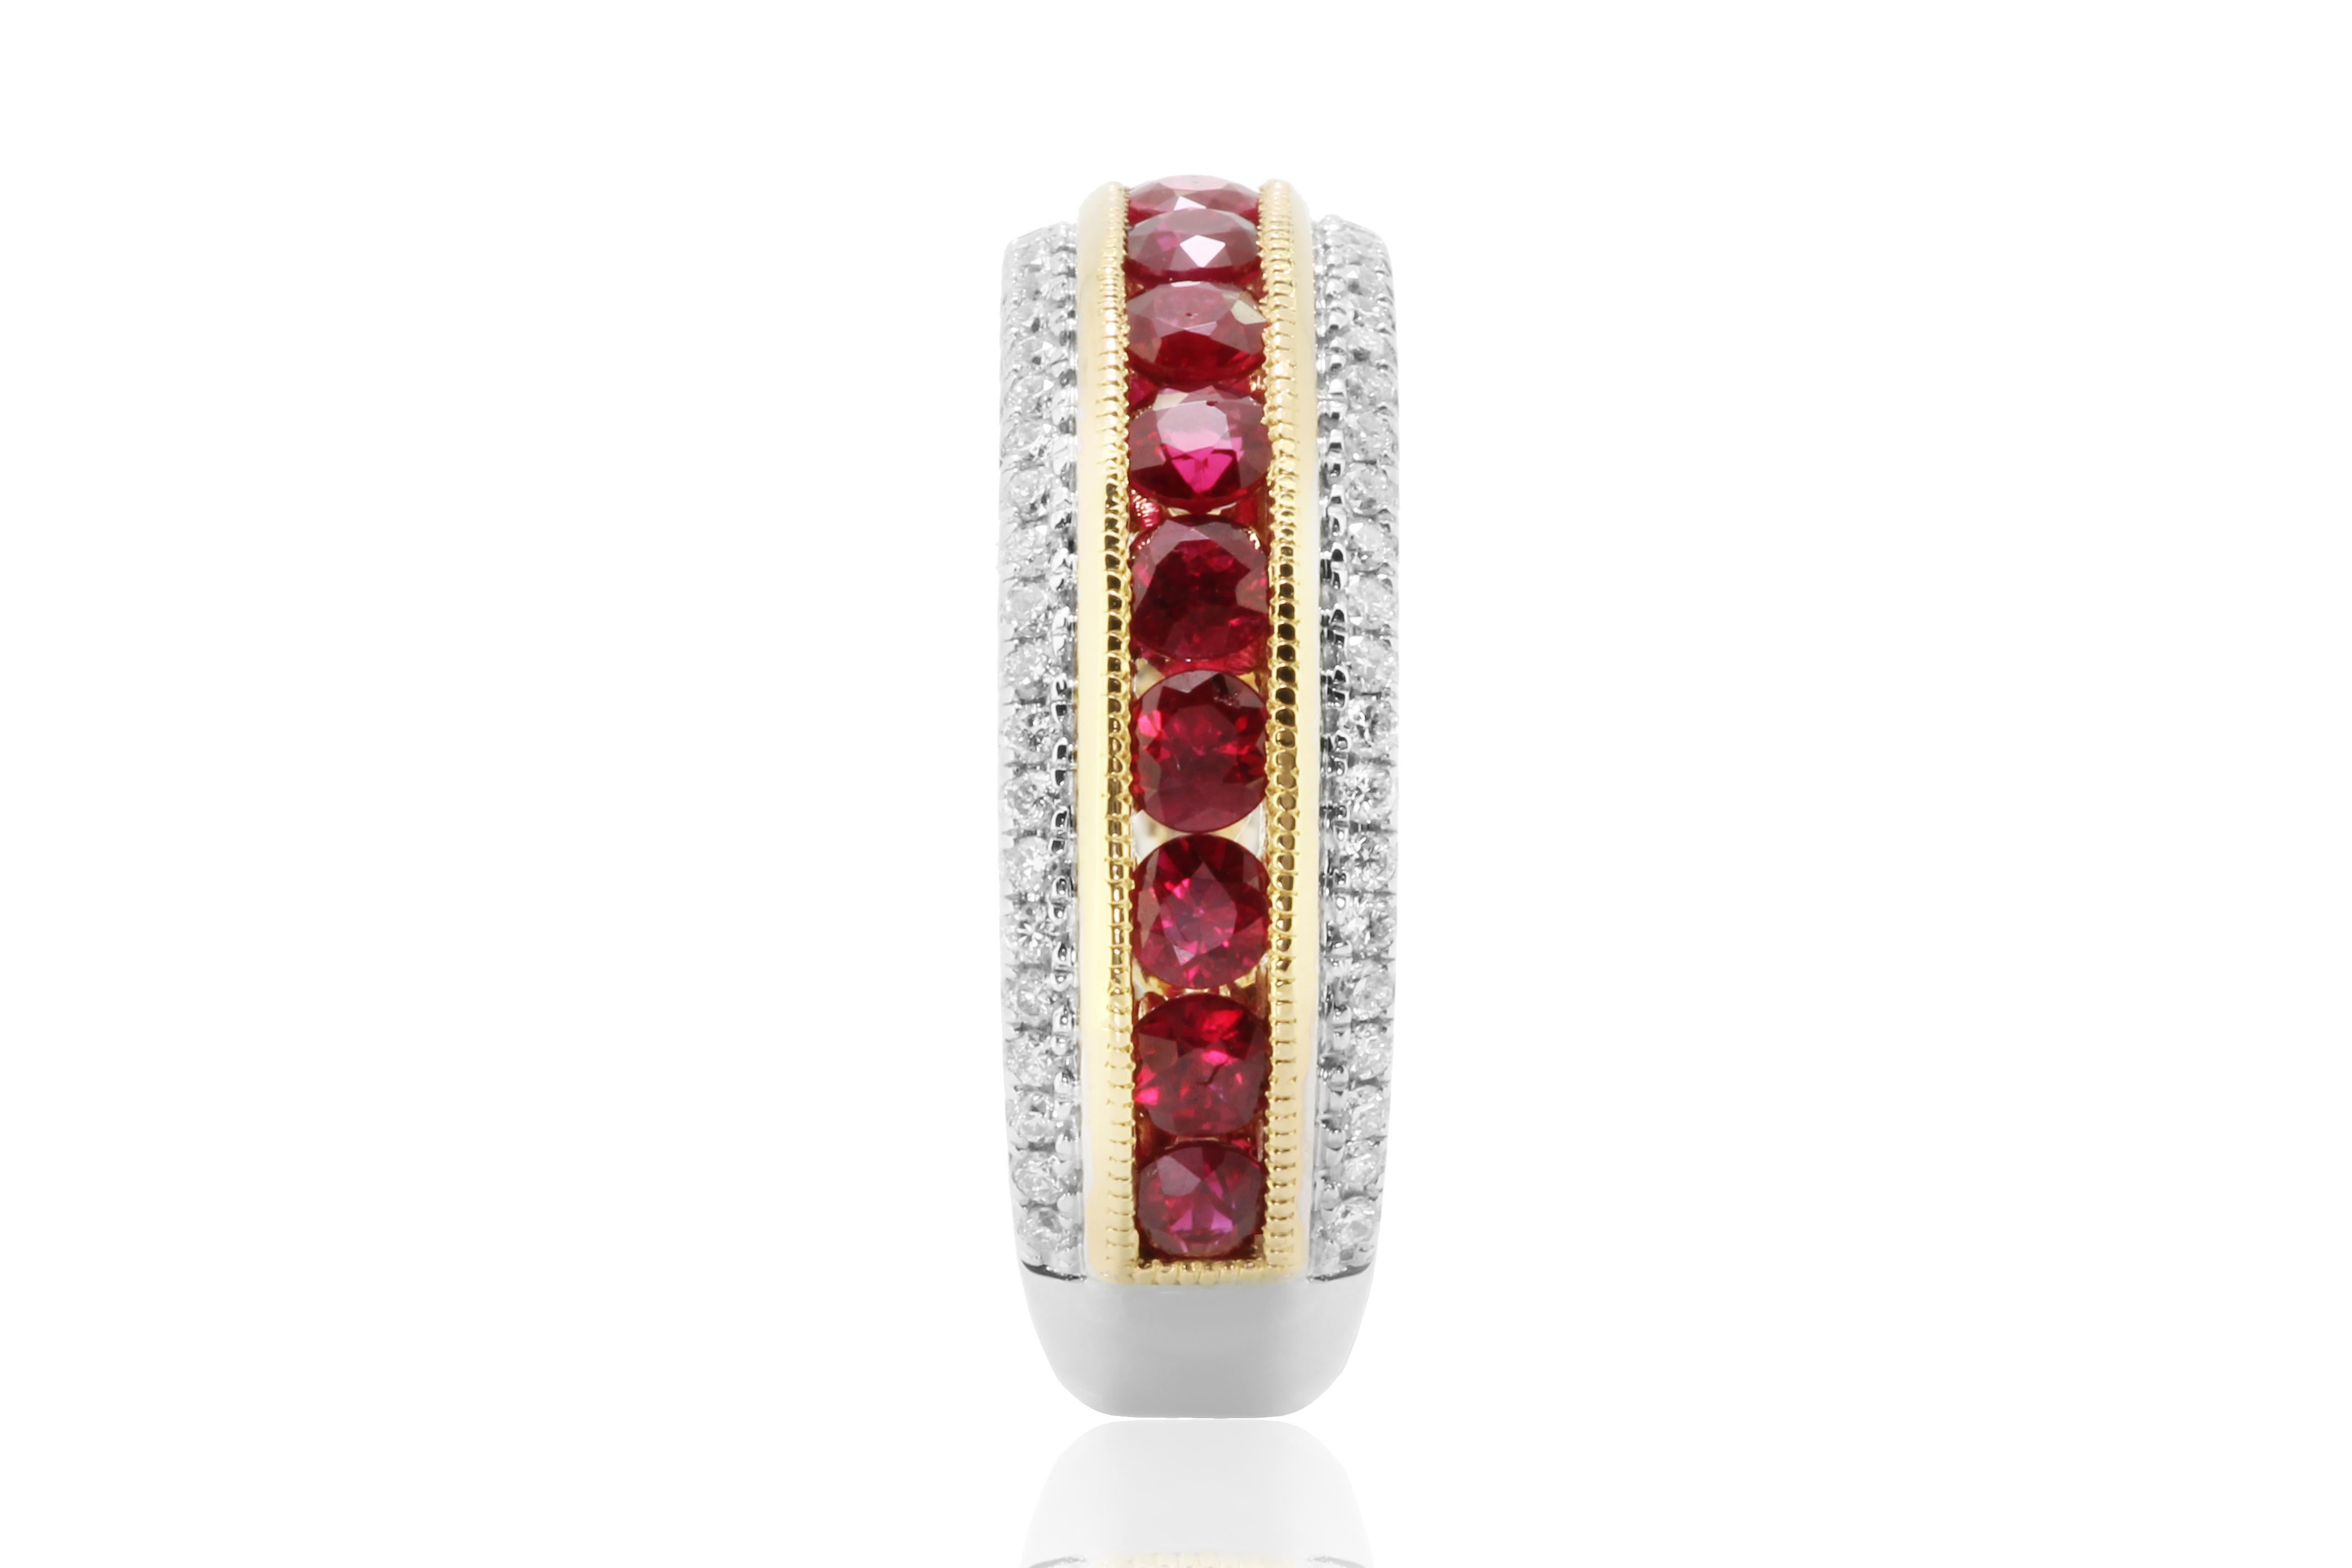 Ruby Round 1.25 Carat in channel setting Flanked with round white diamonds 0.25 Carat in 14K White and Yellow Gold Fashion Cocktail Band Ring .

Total Stone Weight 1.50 Carat